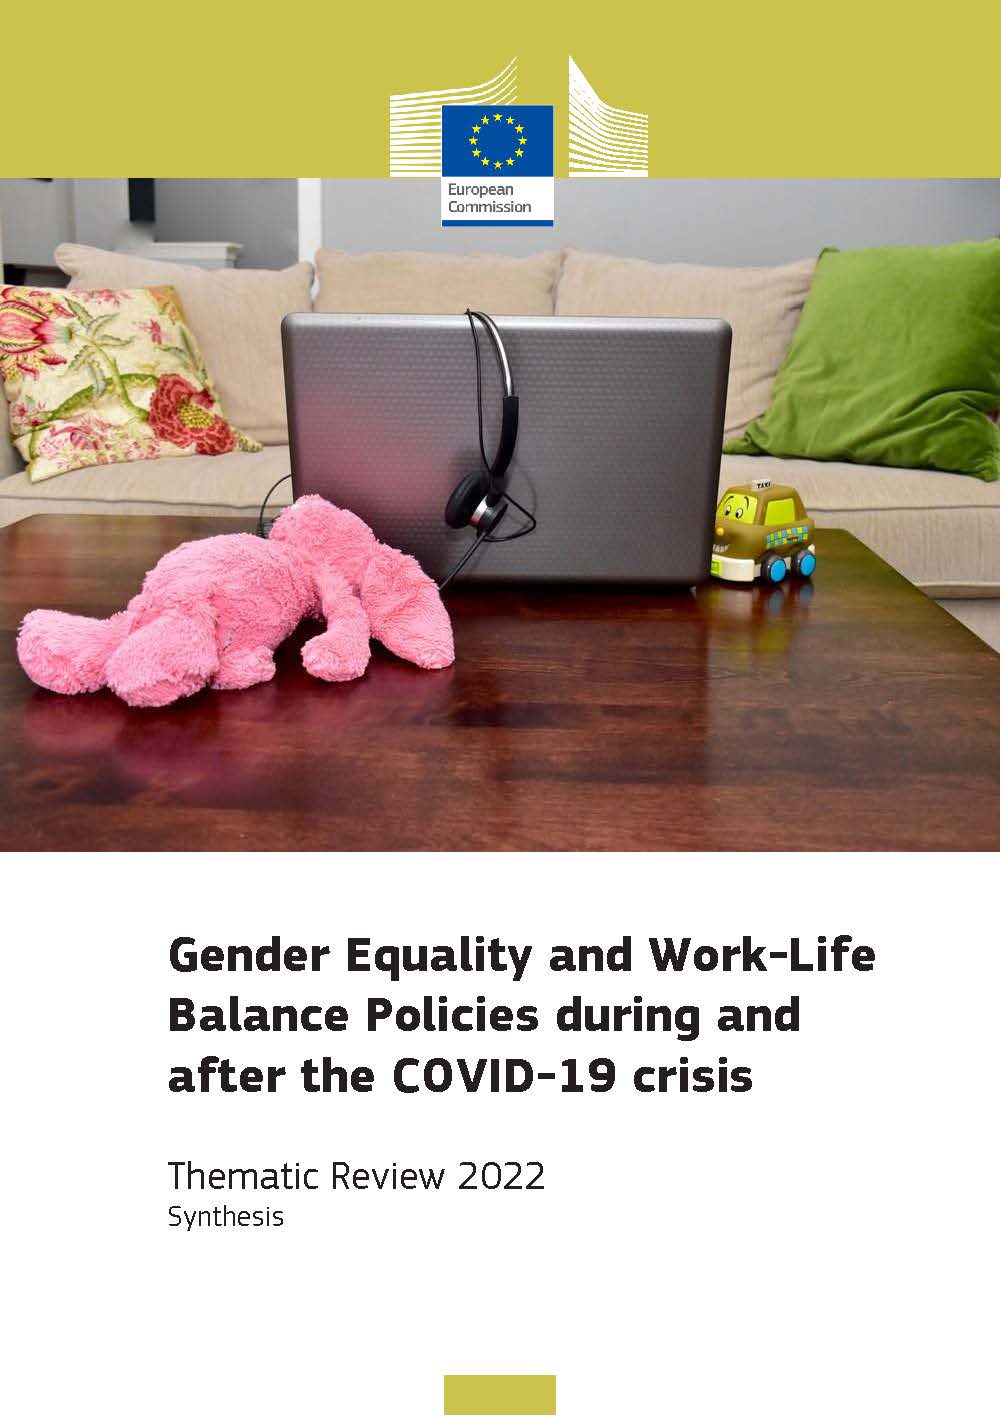 Gender Equality and Work-Life Balance Policies during and after the COVID-19 crisis